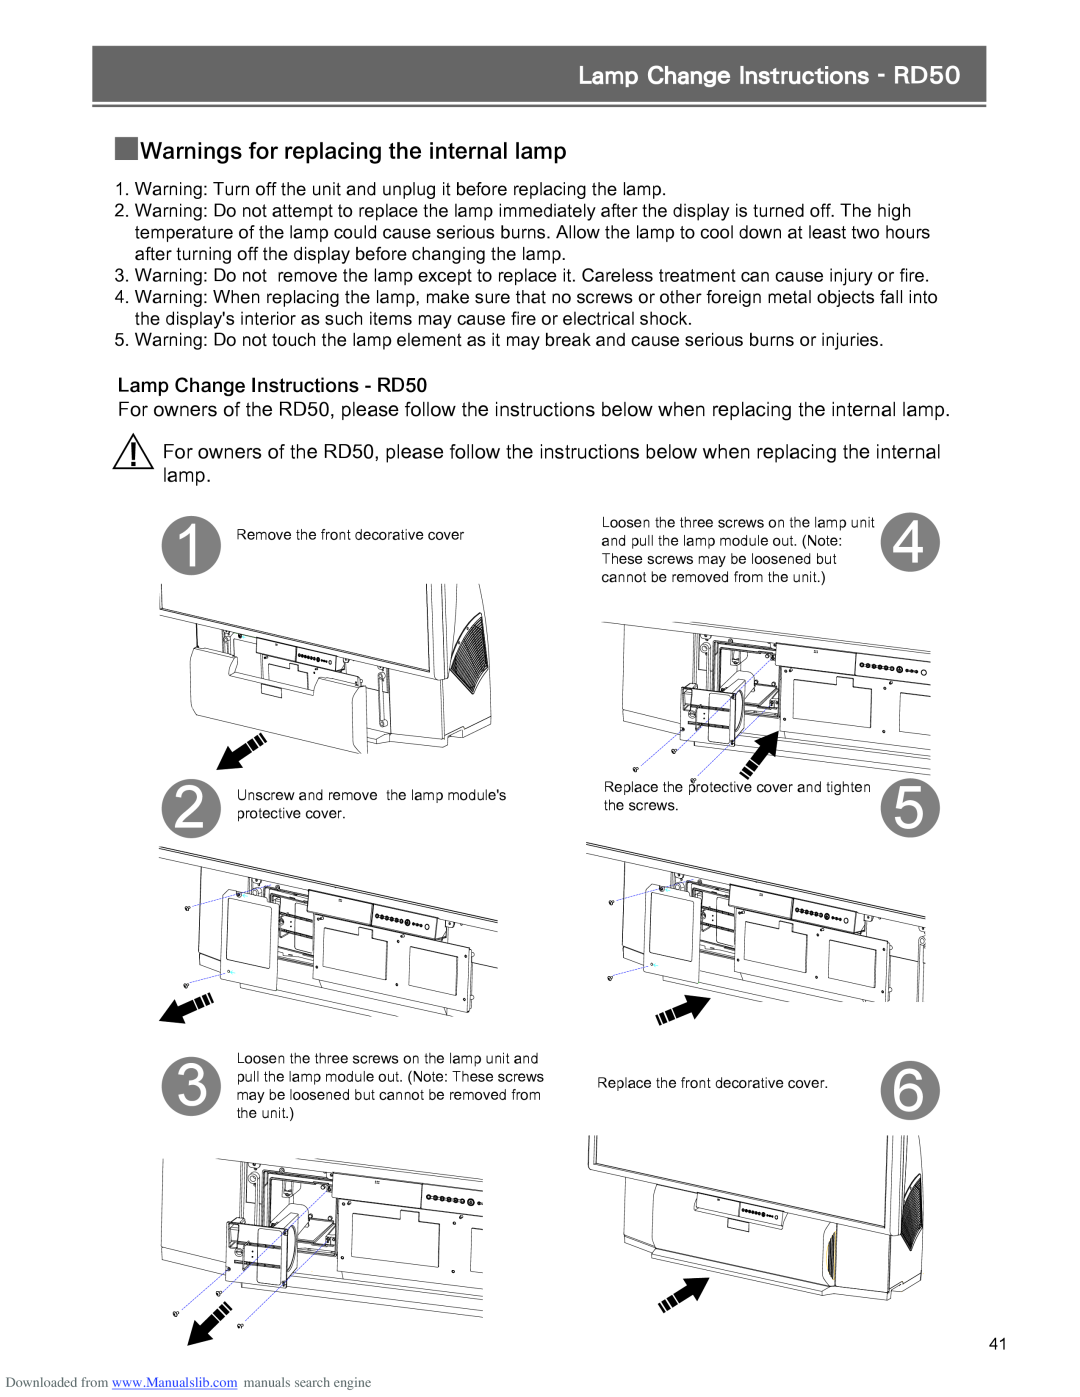 Optoma Technology RD65 manual Lamp Change Instructions - RD50, Warnings for replacing the internal lamp 